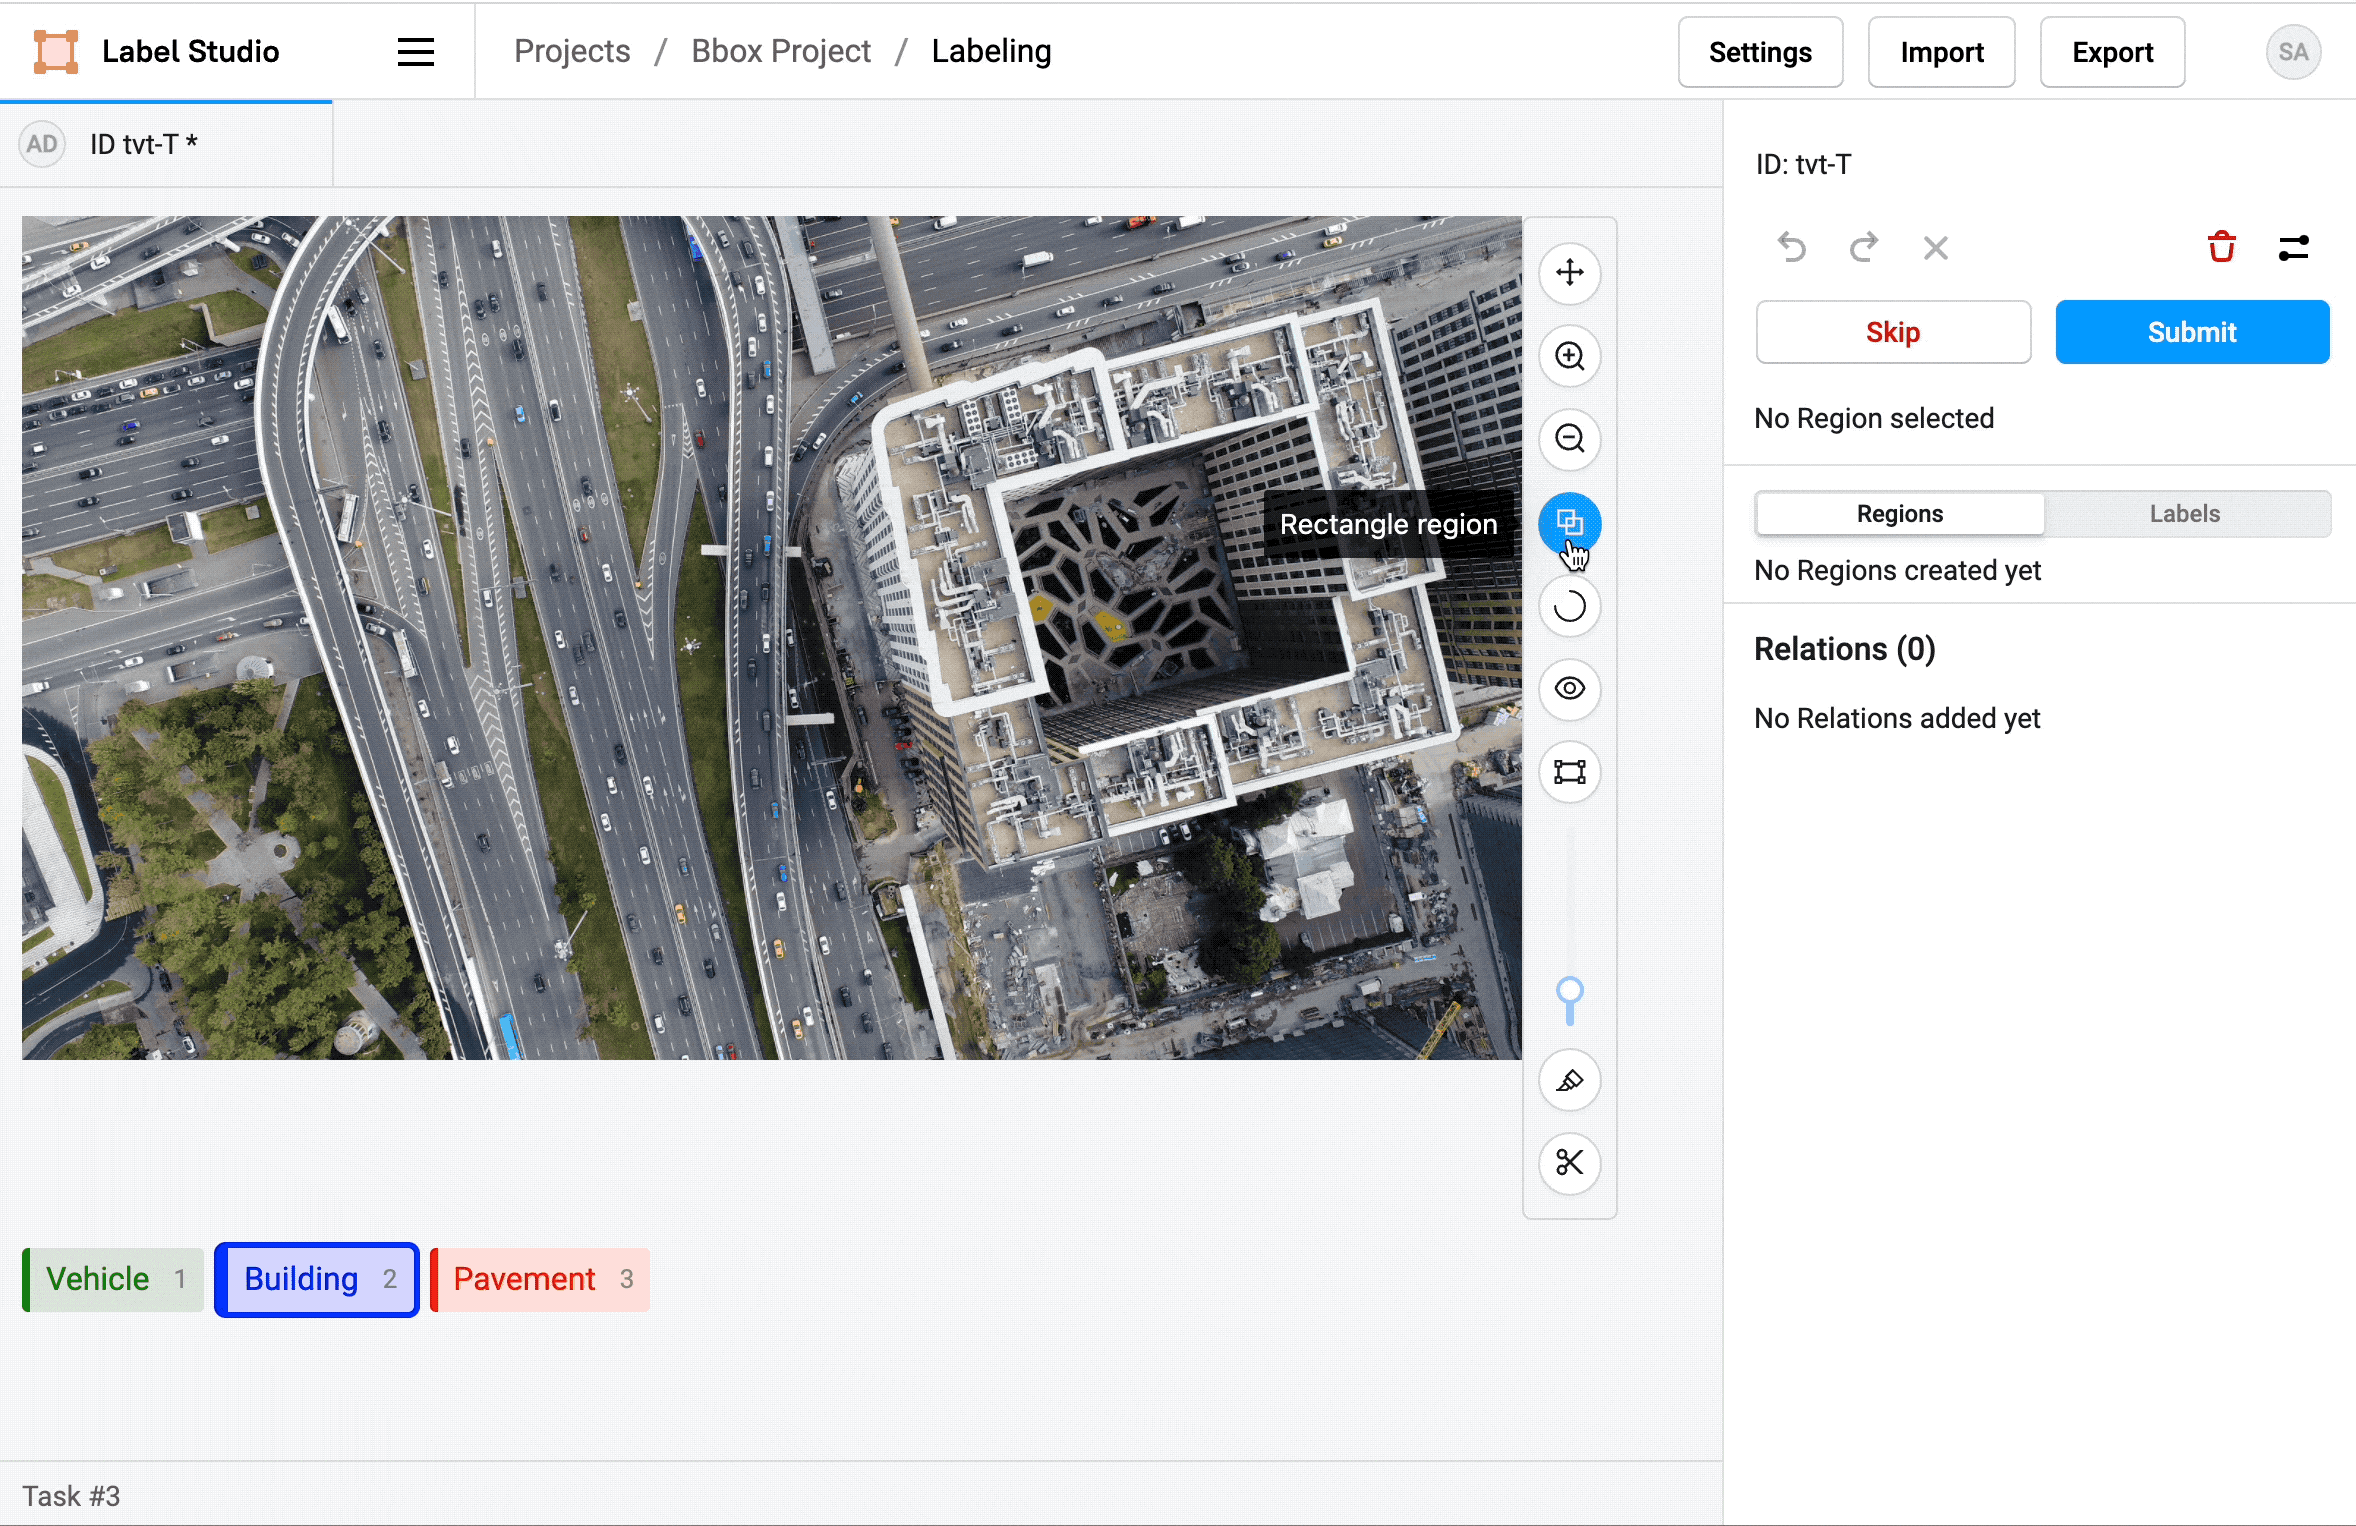 Gif of adding polygons and brush labels to an aerial image of a city in the Label Studio UI.